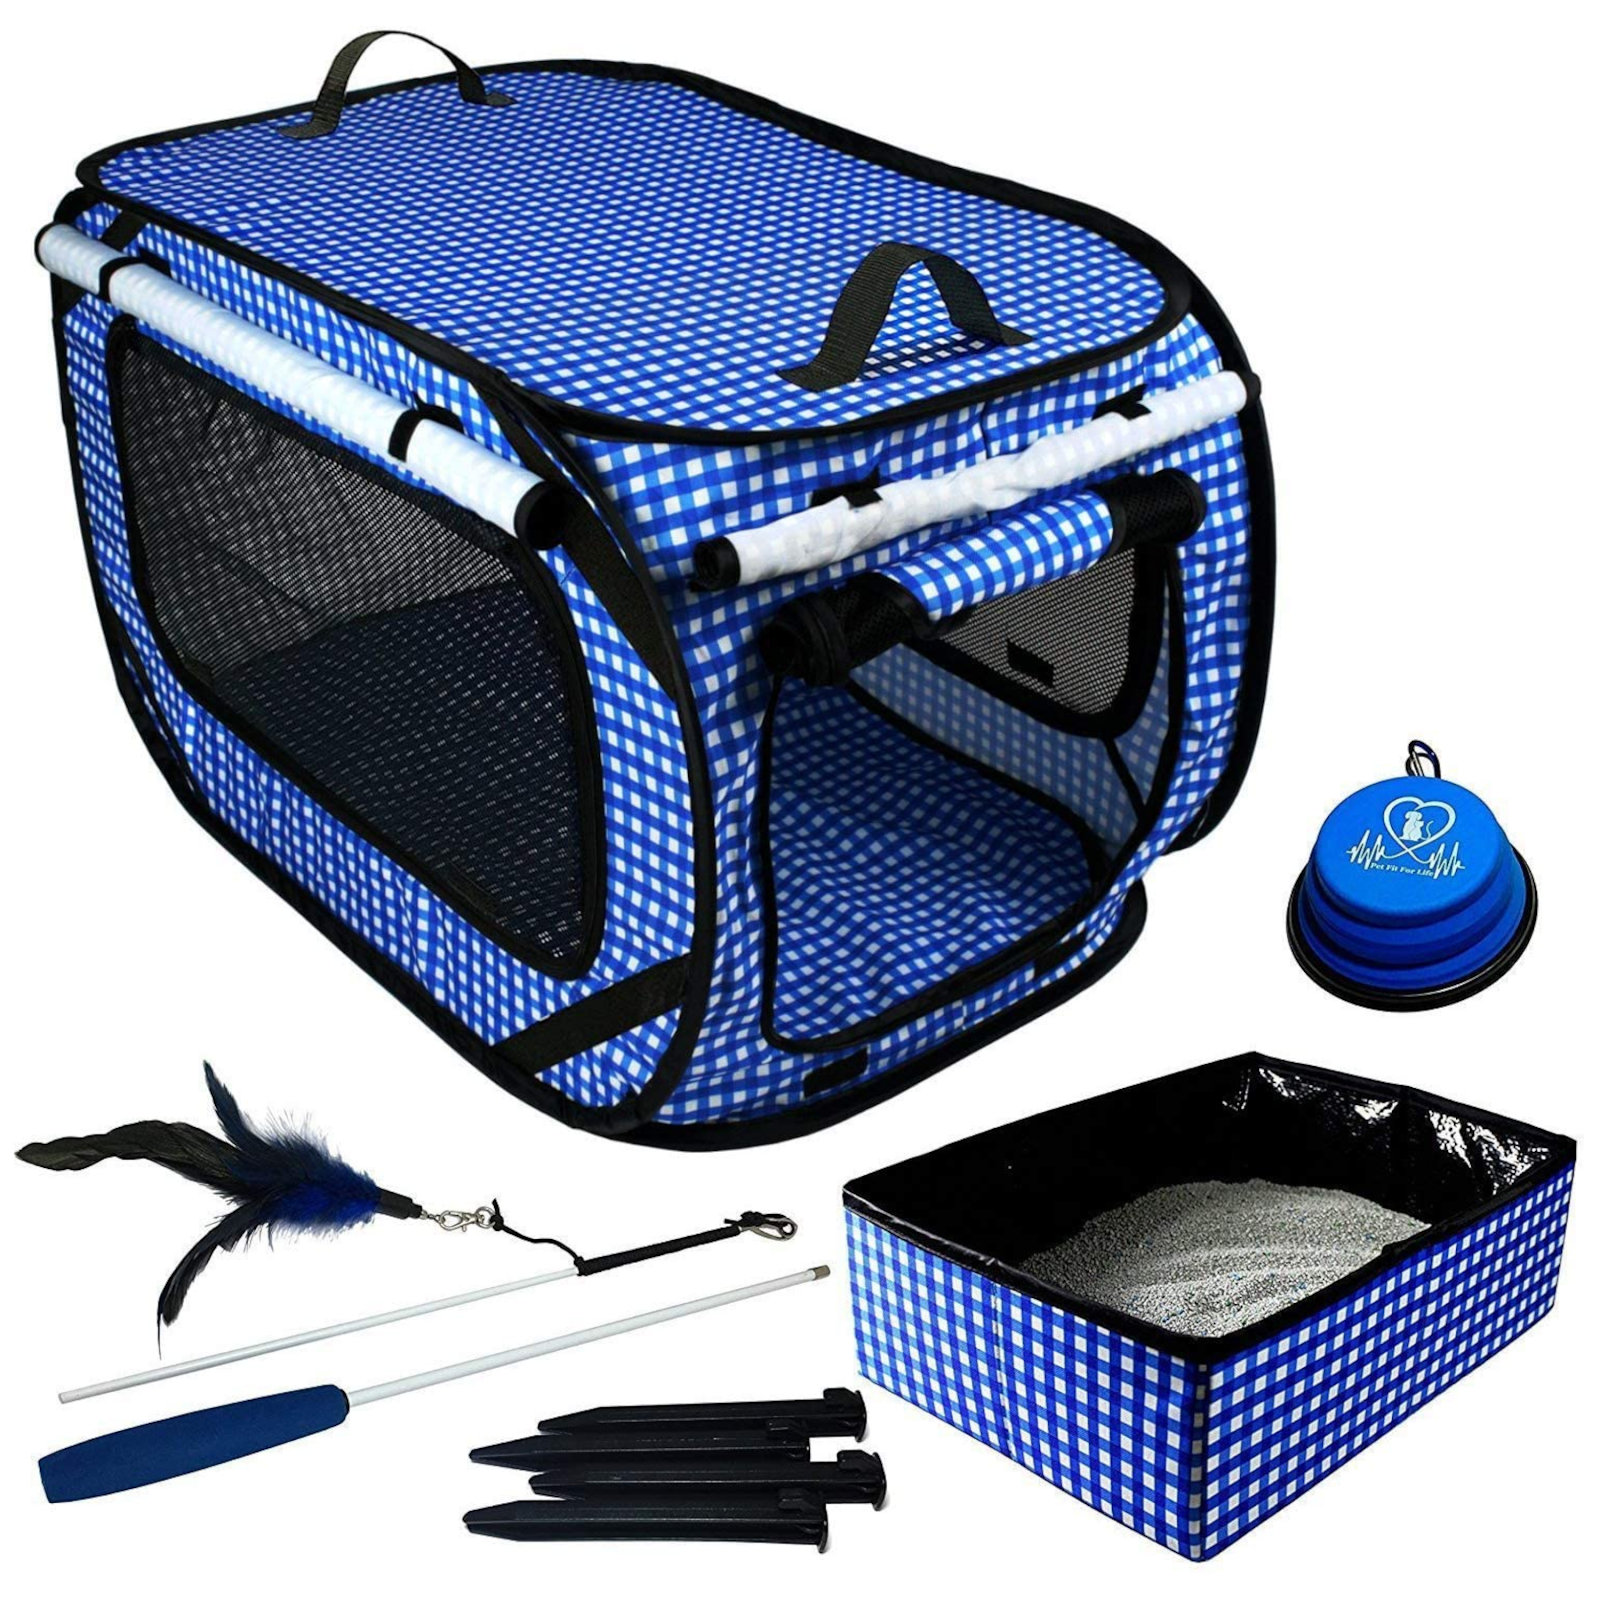 LitaiL Cat Carrier for Cats and Small Medium Dogs up to 25 lbs, Pet Carrier  with Cat Litter Box and Soft Mat, Blue 